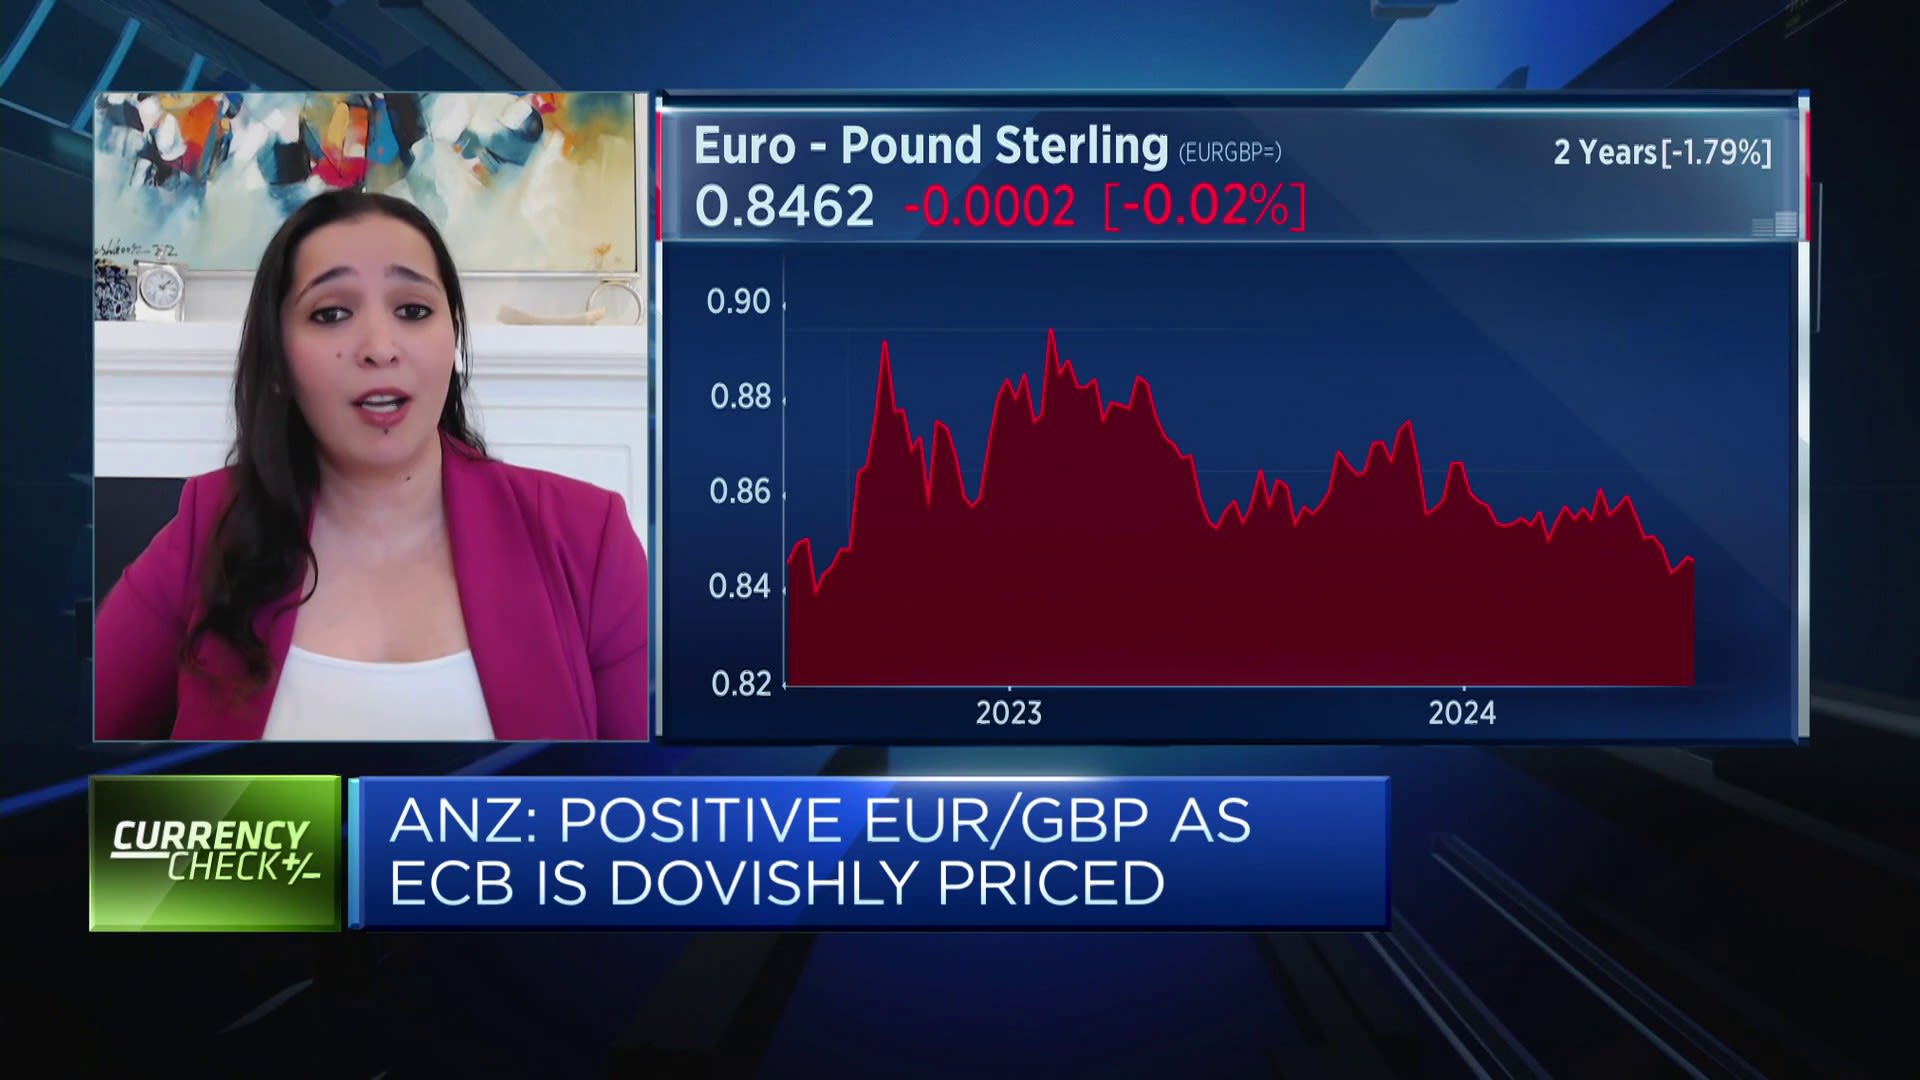 Analyst discusses the impact of the UK and French elections on the sterling and euro